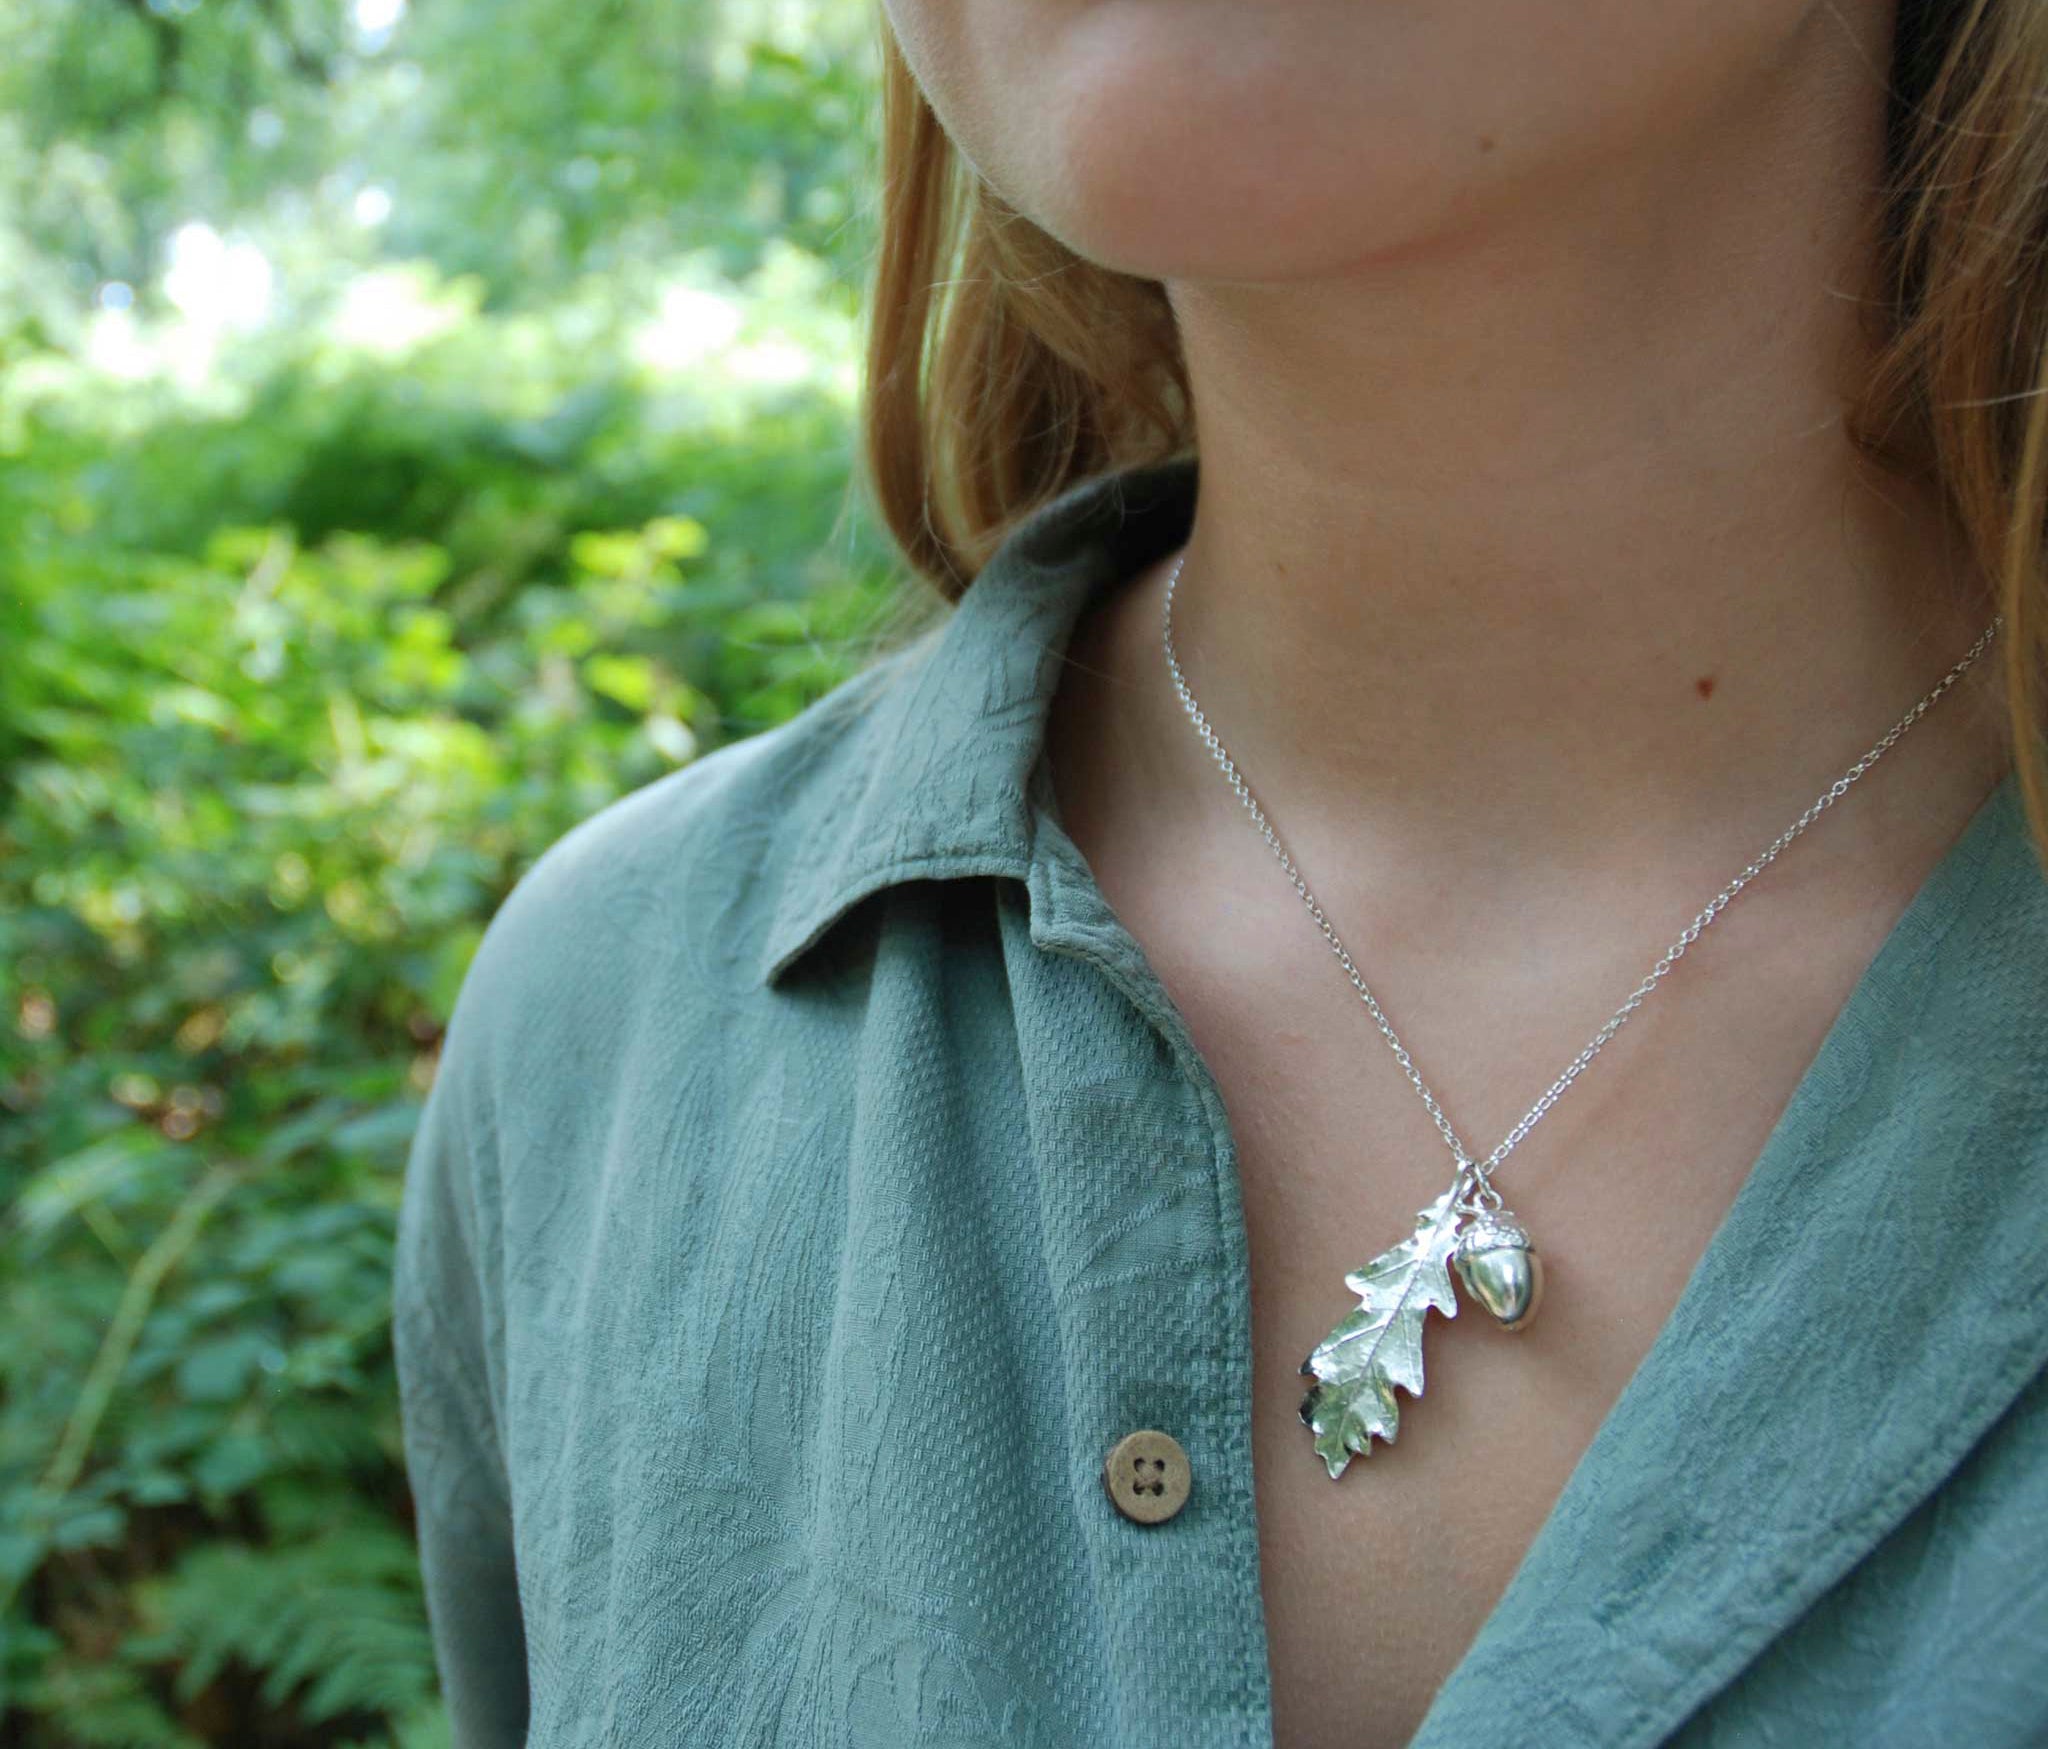 large oak leaf and acorn charm necklace by Notion Jewellery